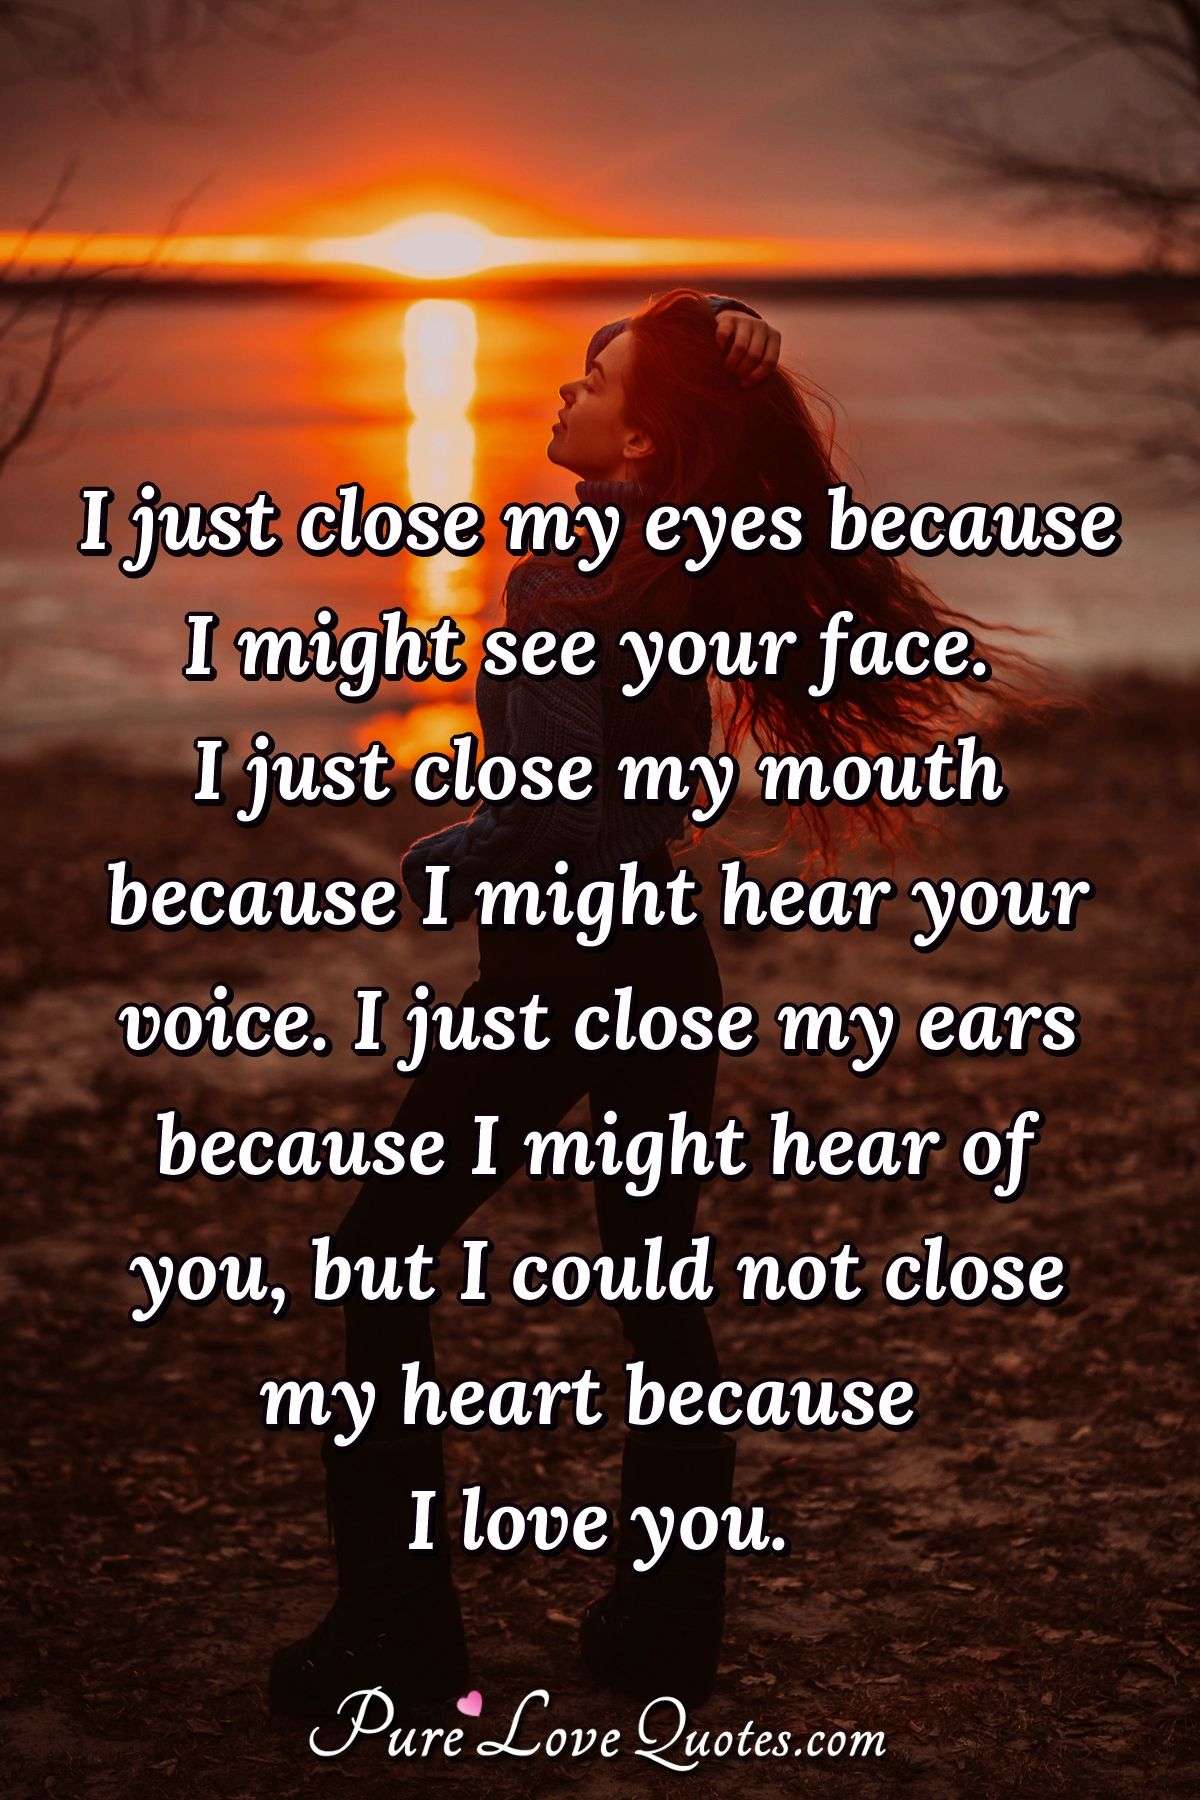 I just close my eyes because I might see your face. I just close my mouth because I might hear your voice. I just close my ears because I might hear of you, but I could not close my heart because I love you. - Anonymous